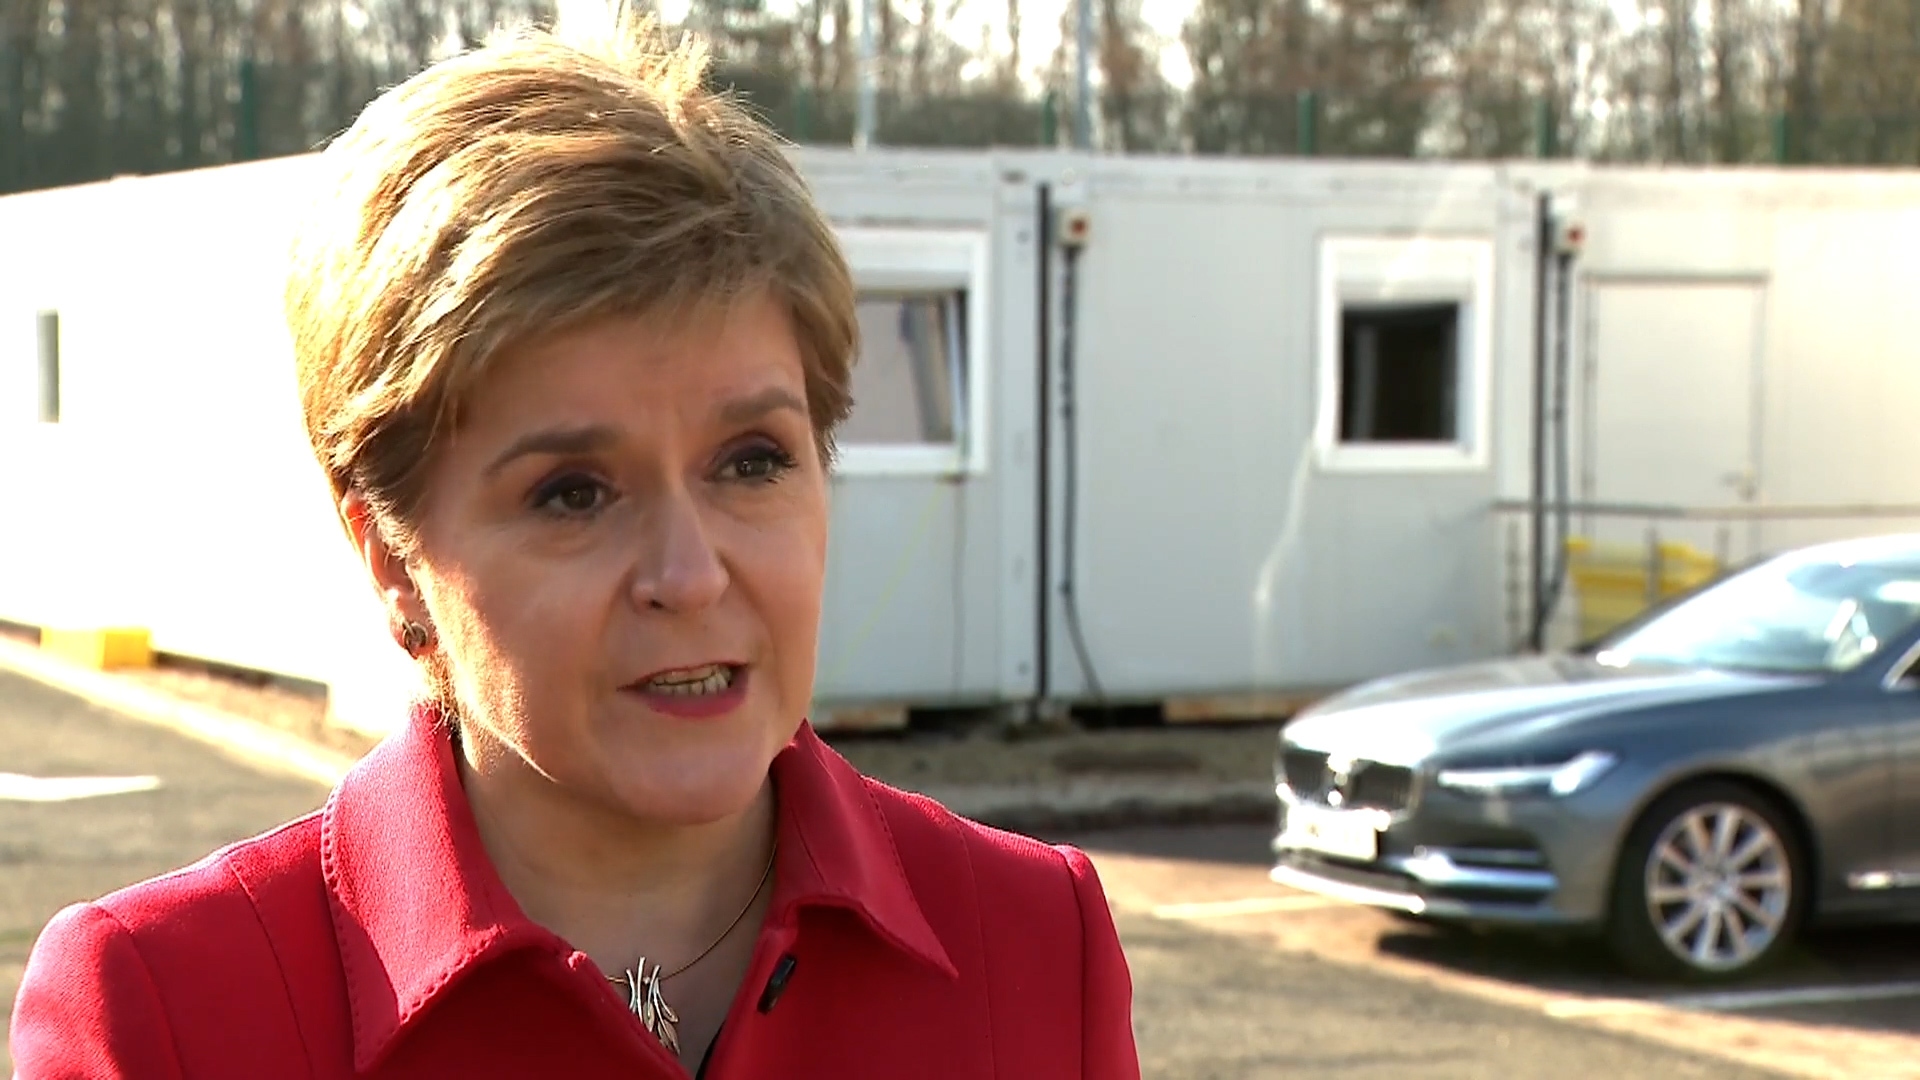  Scotland’s First Minister visited the site on Monday morning.